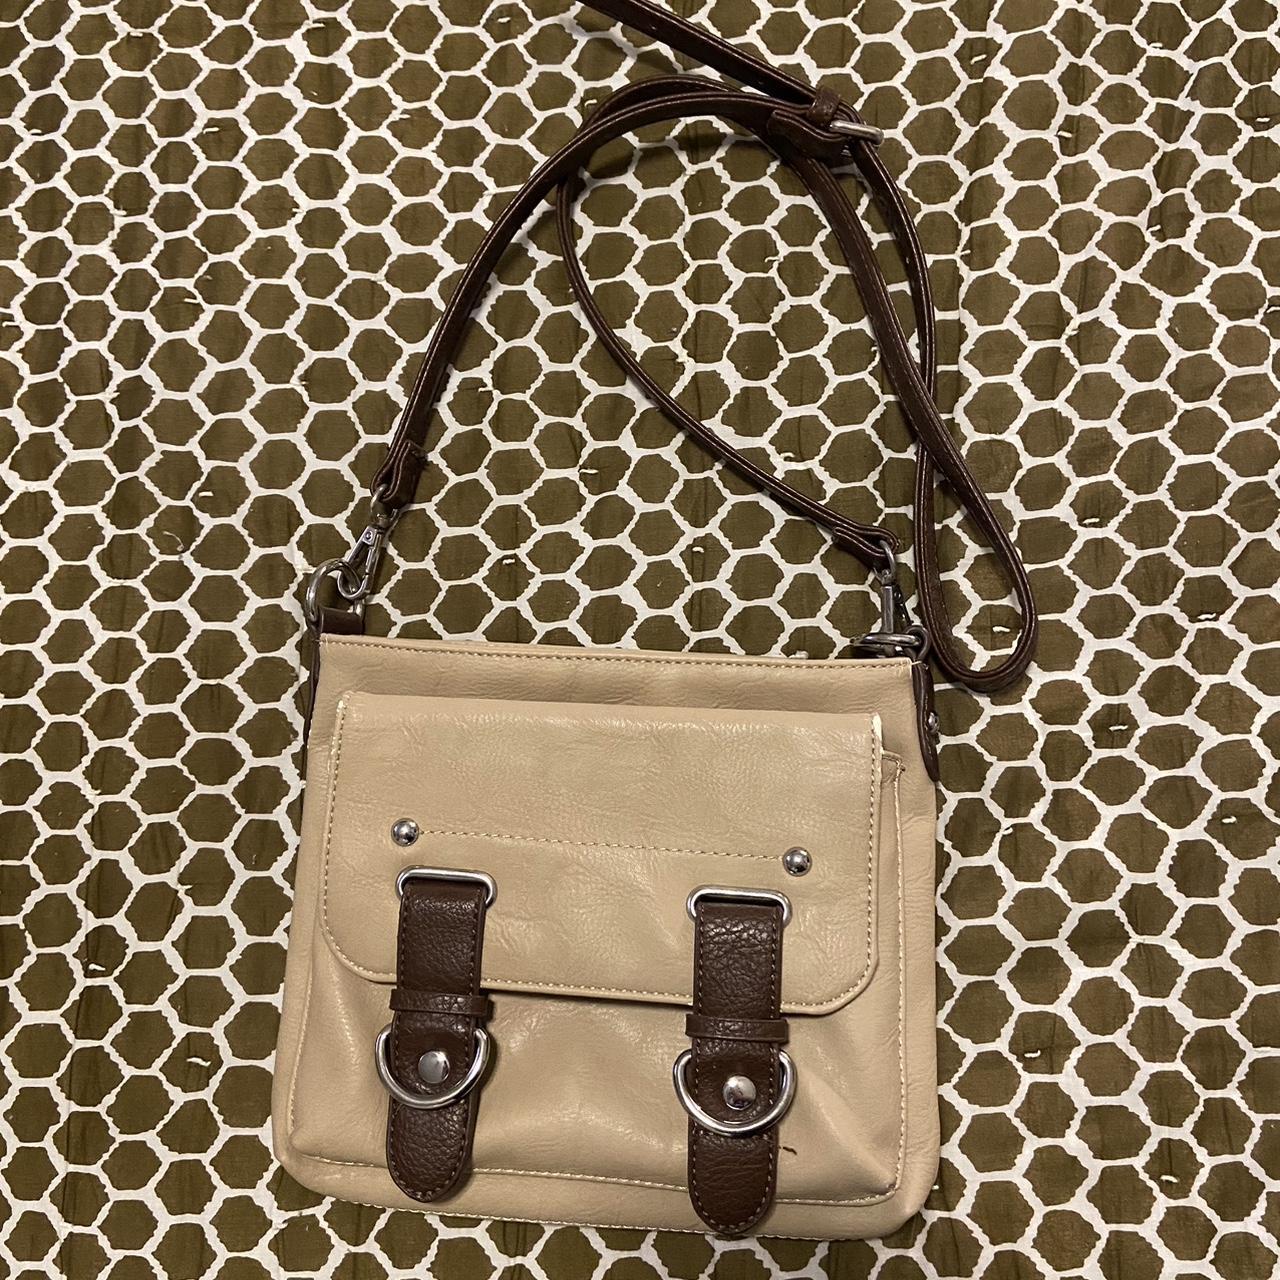 Buy Small or Medium TAN Color Leather Bag. Tan Crossbody Purse. Soft Leather  Bag. Everyday Leather Tan Color Bag. Rectangular Leather Clutch Bag Online  in India - Etsy